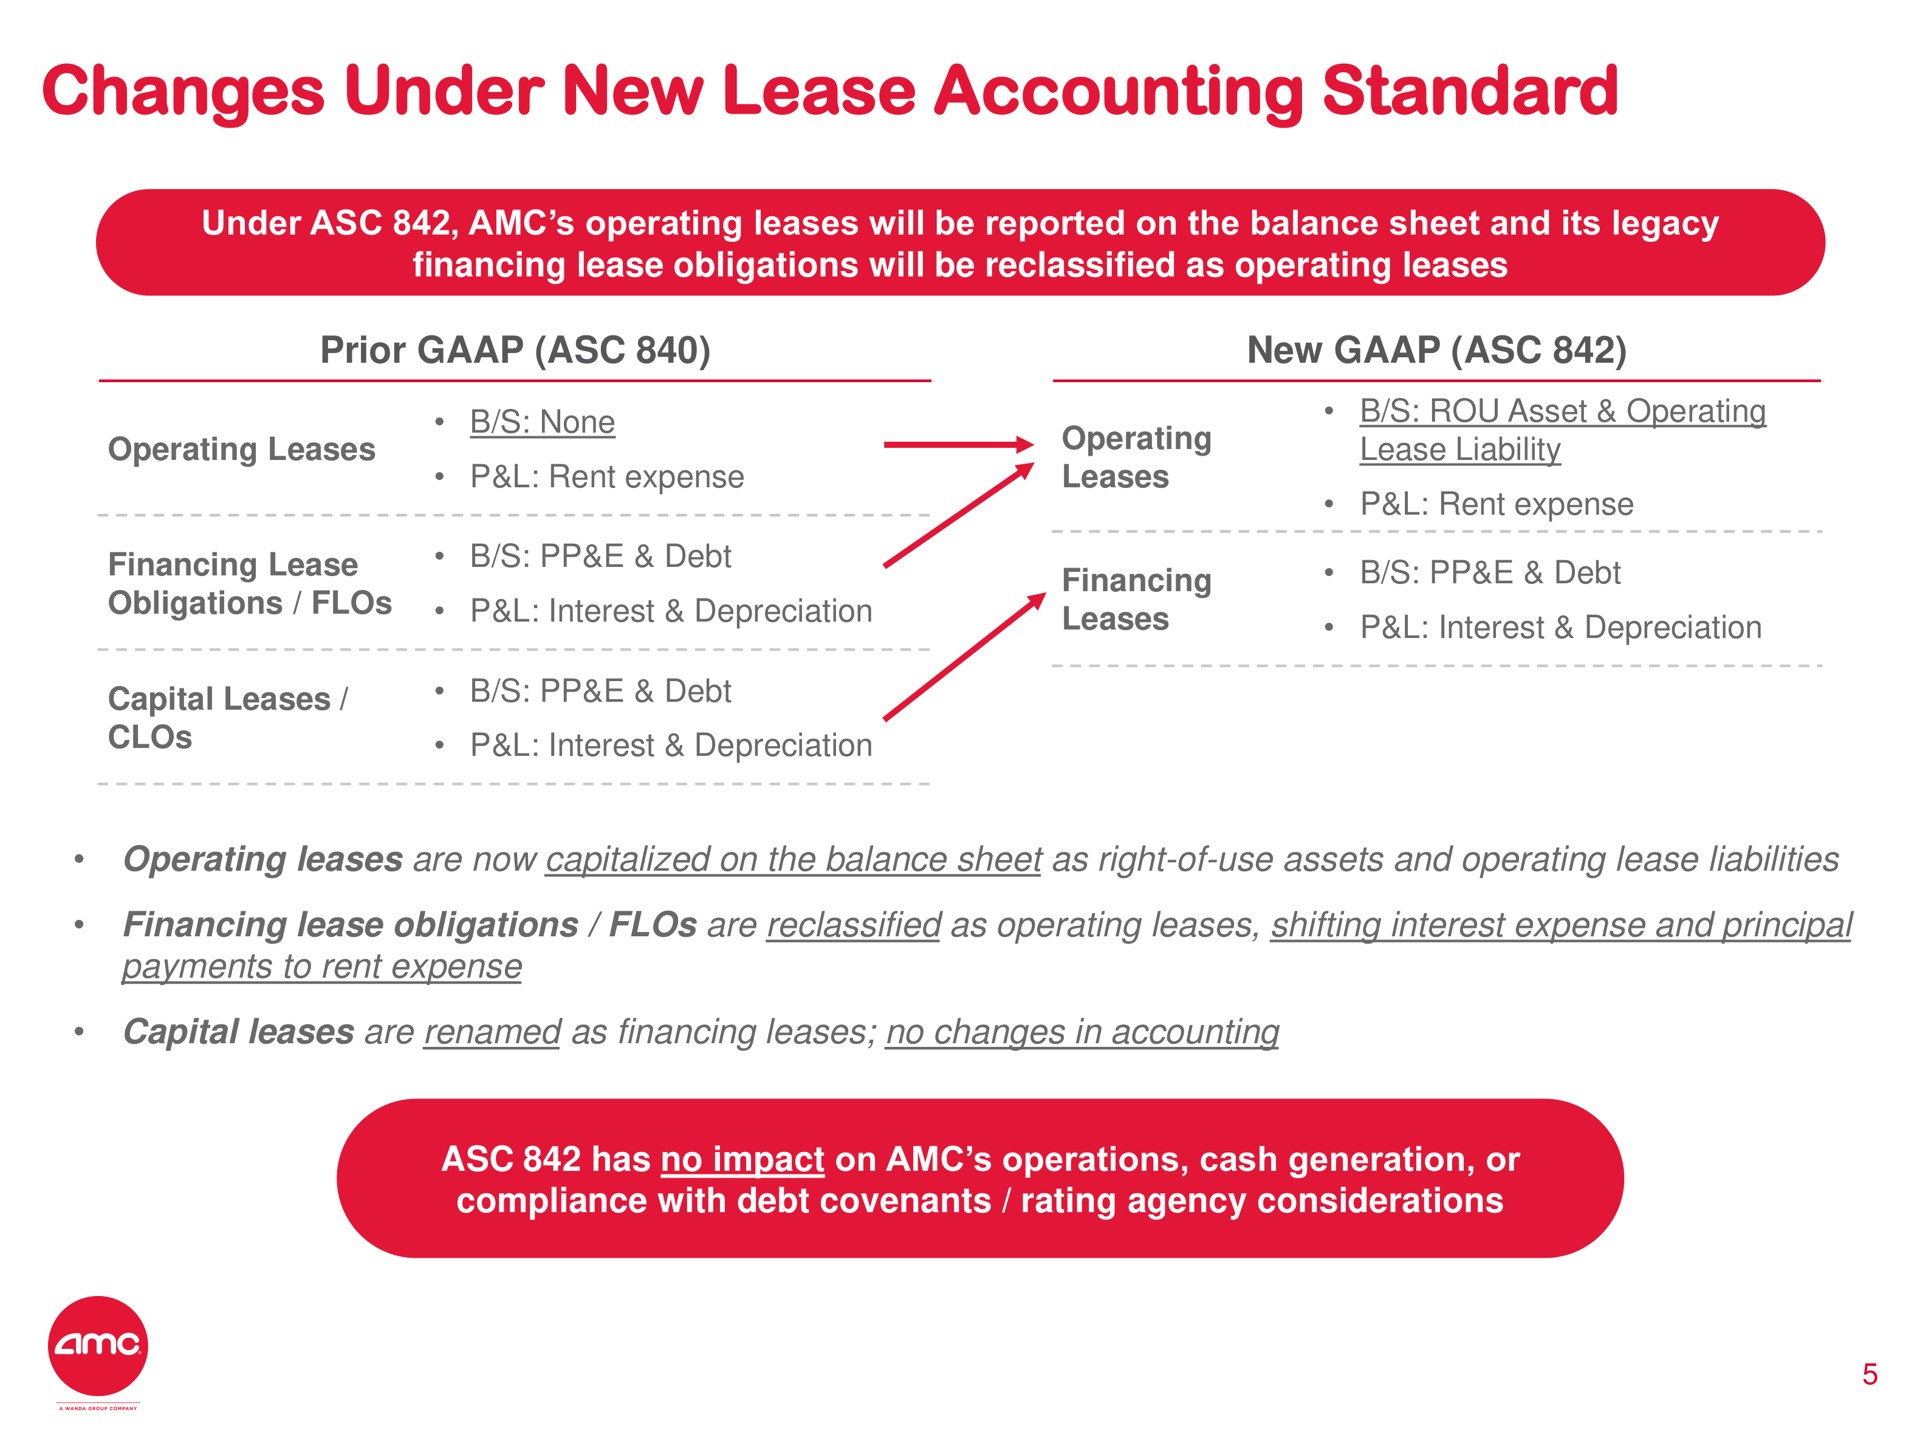 changes under new lease accounting standard capital leases debt | AMC